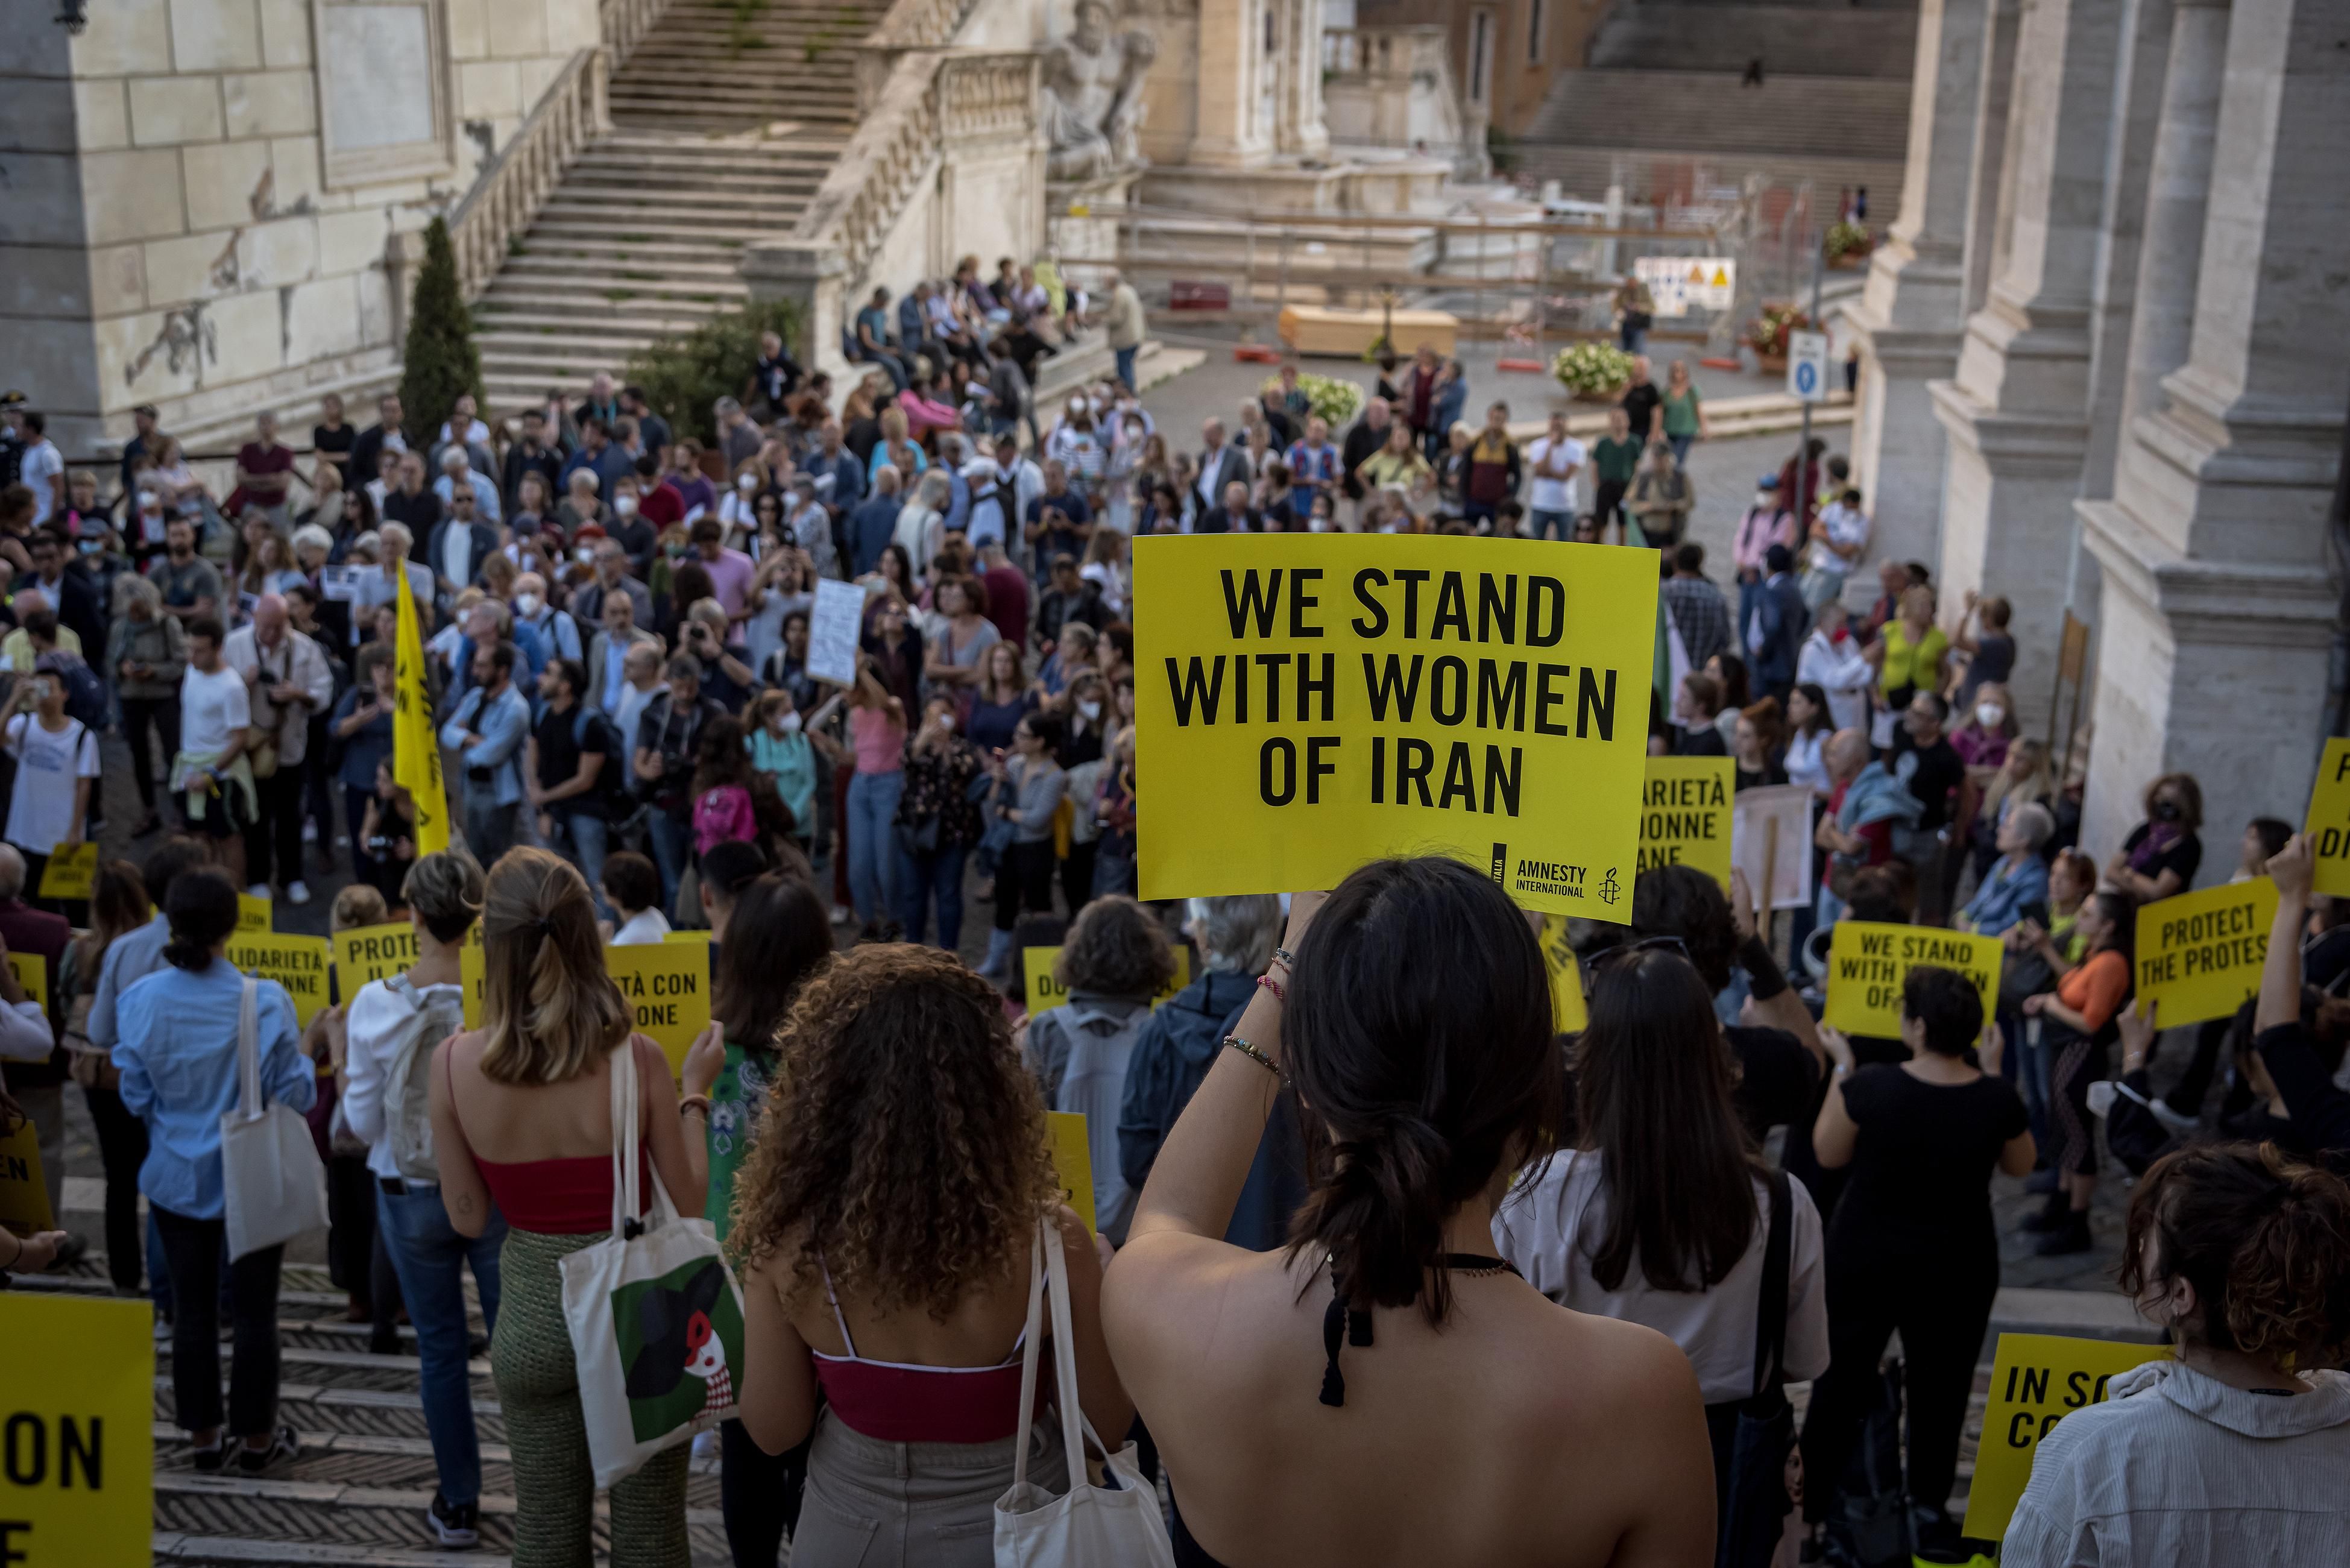 Demonstrators in Italy with signs that say "We Stand With Women of Iran"